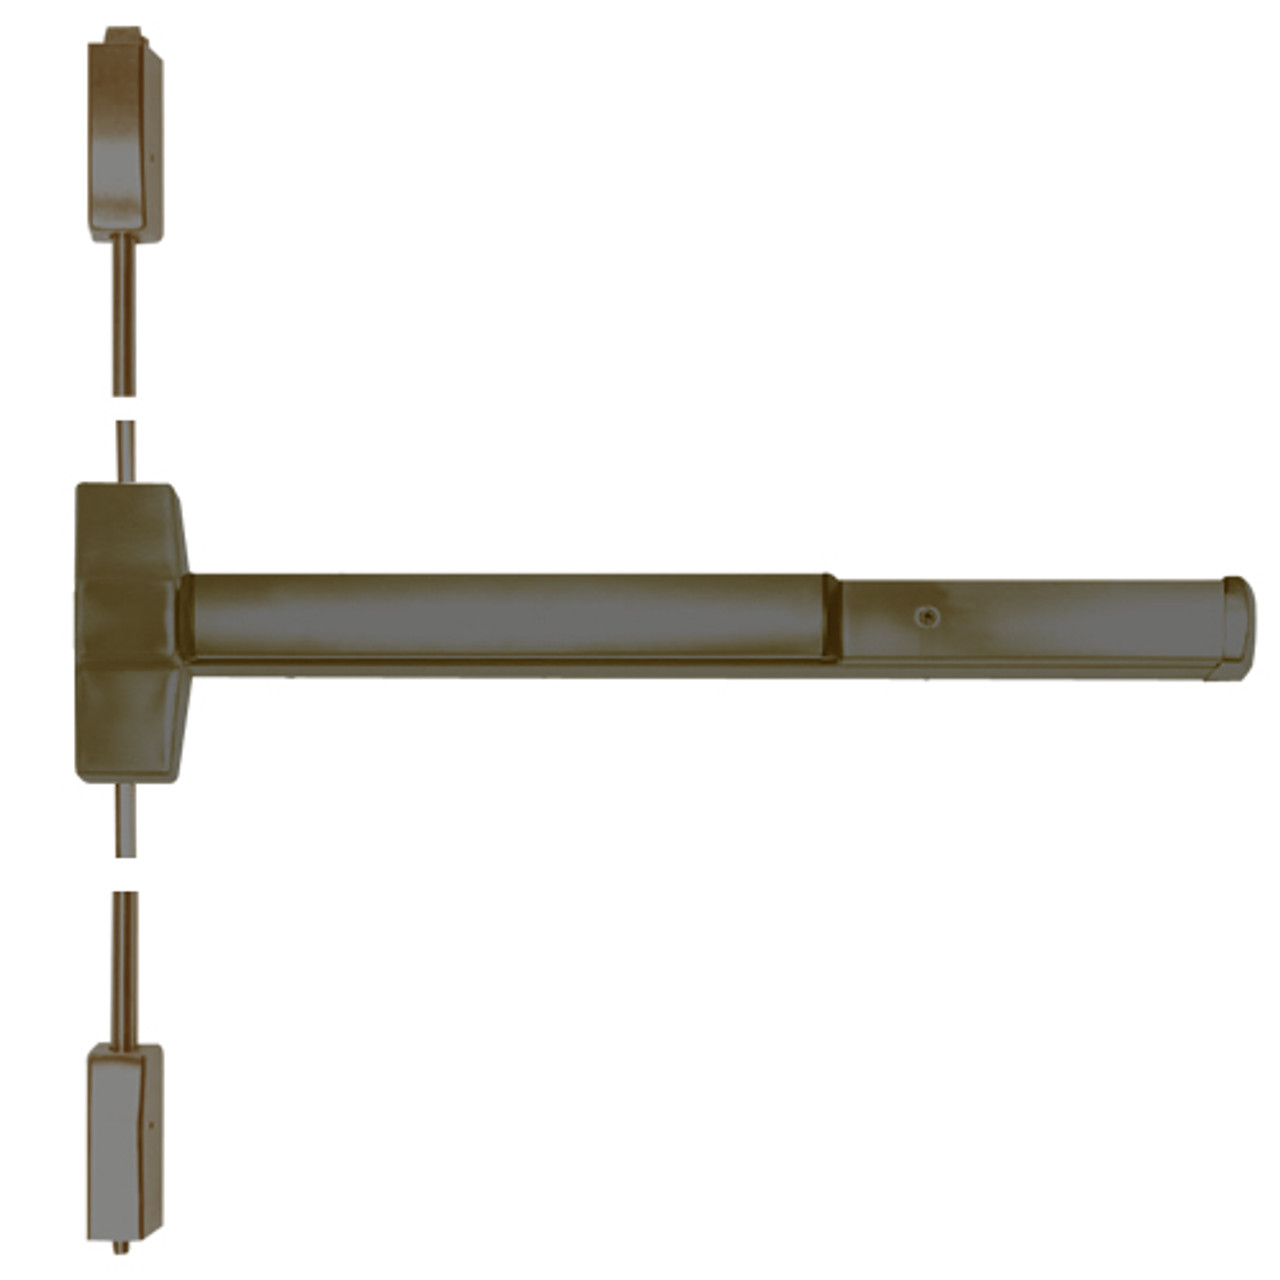 ED5400-613-W048-MELR-M92 Corbin ED5400 Series Non Fire Rated Vertical Rod Exit Device with Motor Latch Retraction and Touchbar Monitoring in Oil Rubbed Bronze Finish